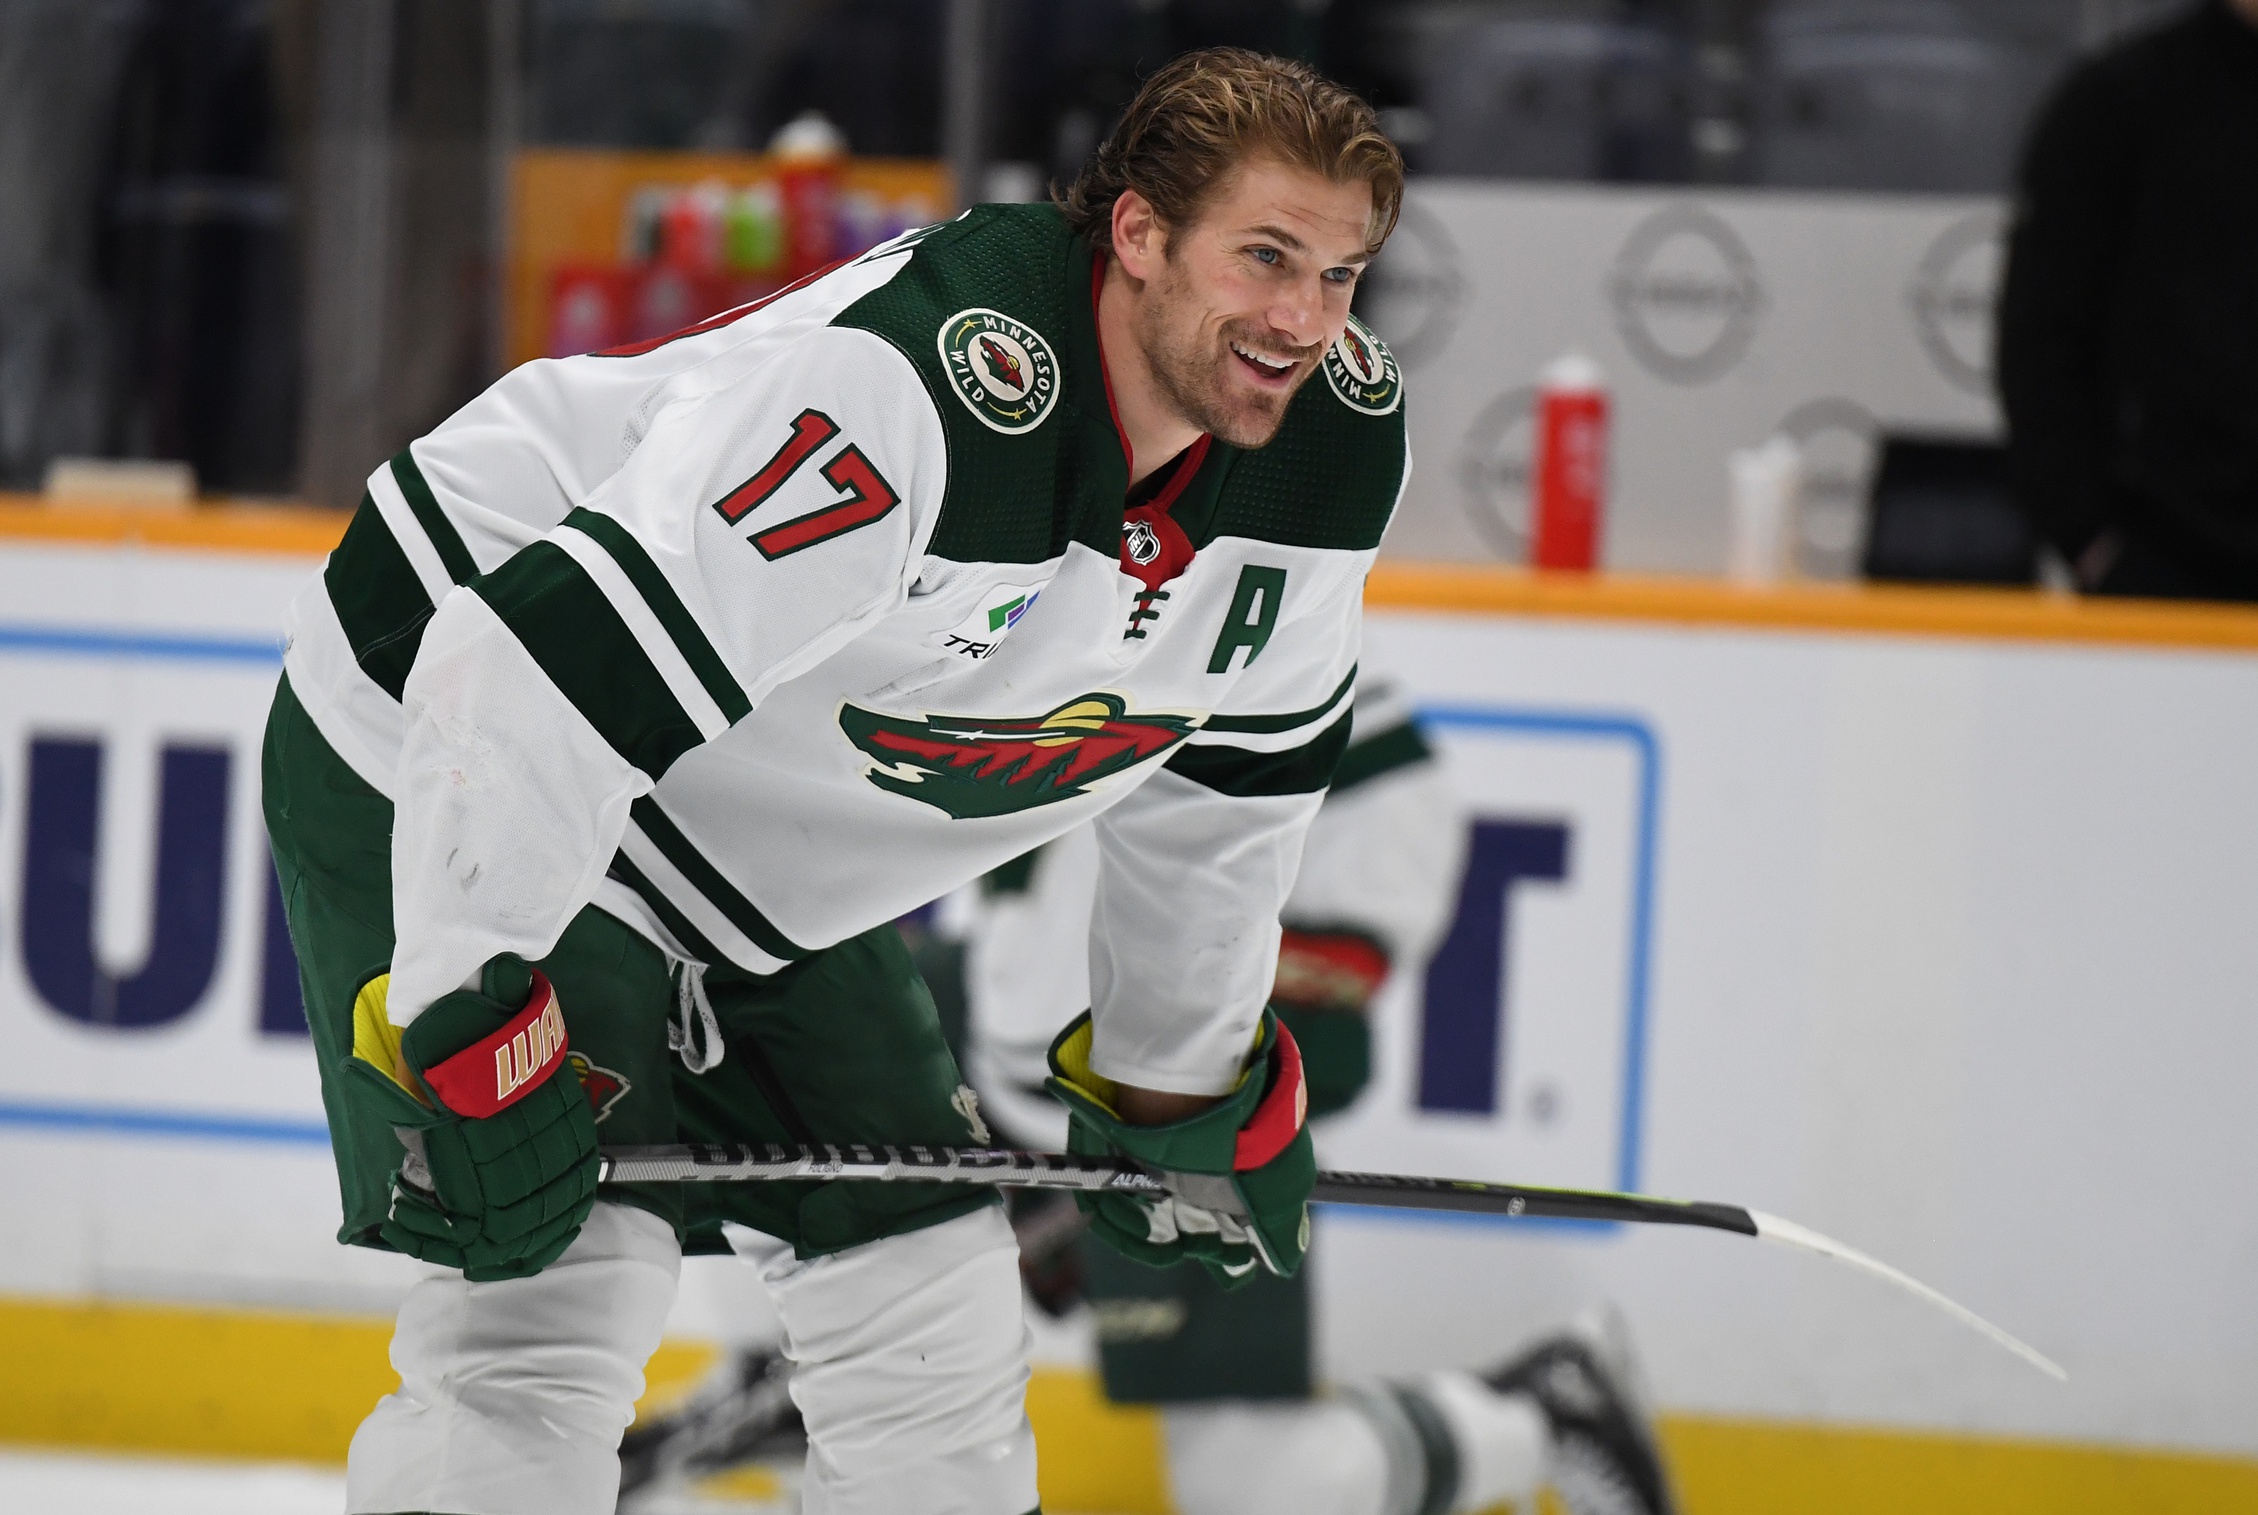 Marcus Foligno plays physical but he also can score, kill